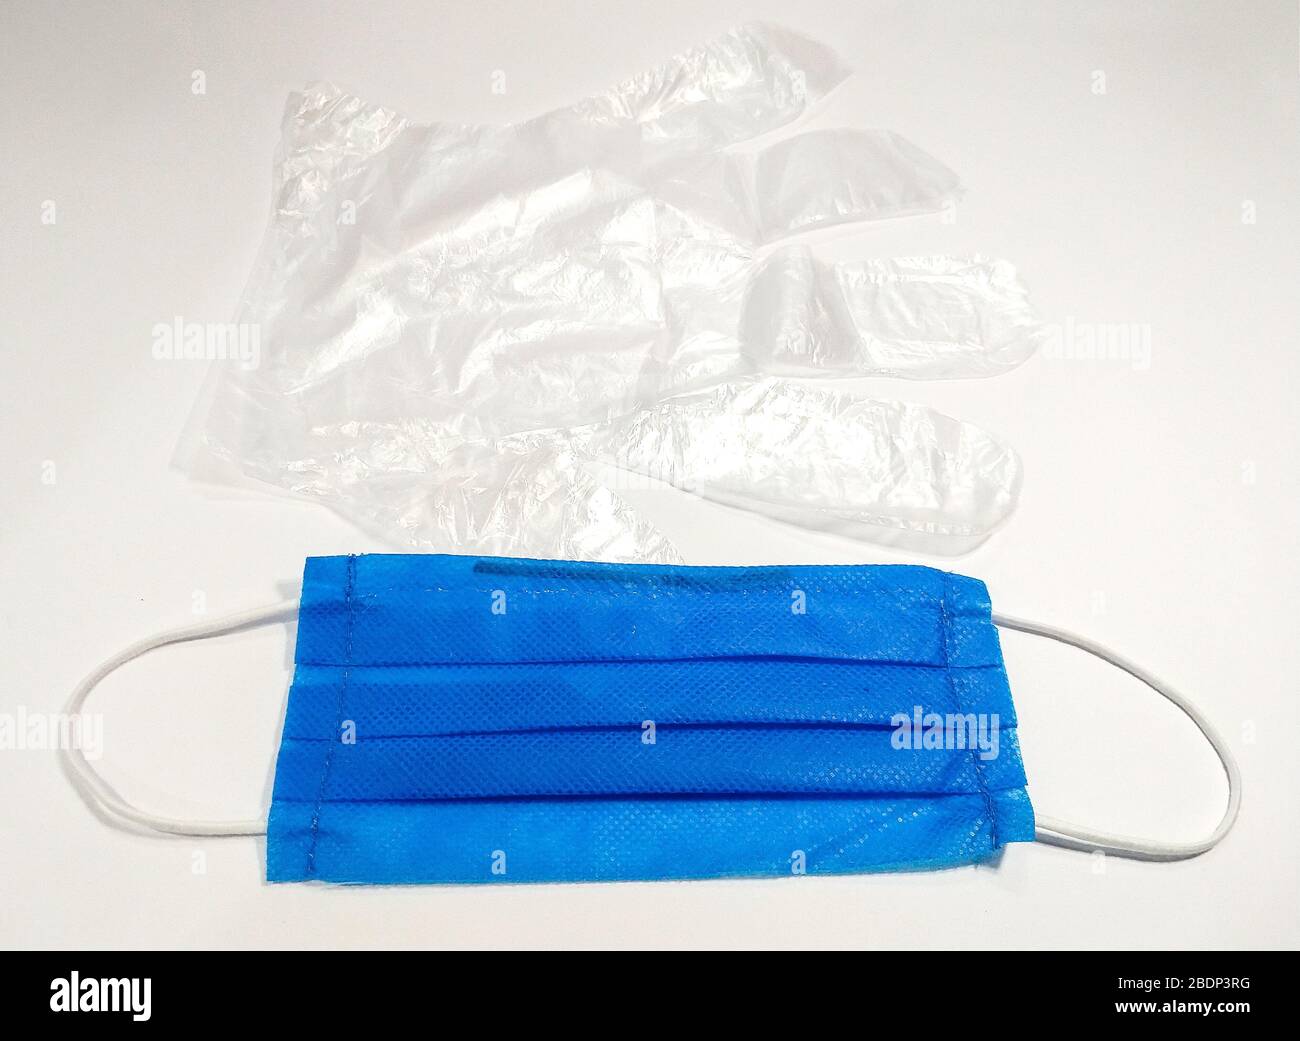 Surgical mask and disposable transparent clear plastic gloves for protection against corona virus, COVID-19 Stock Photo